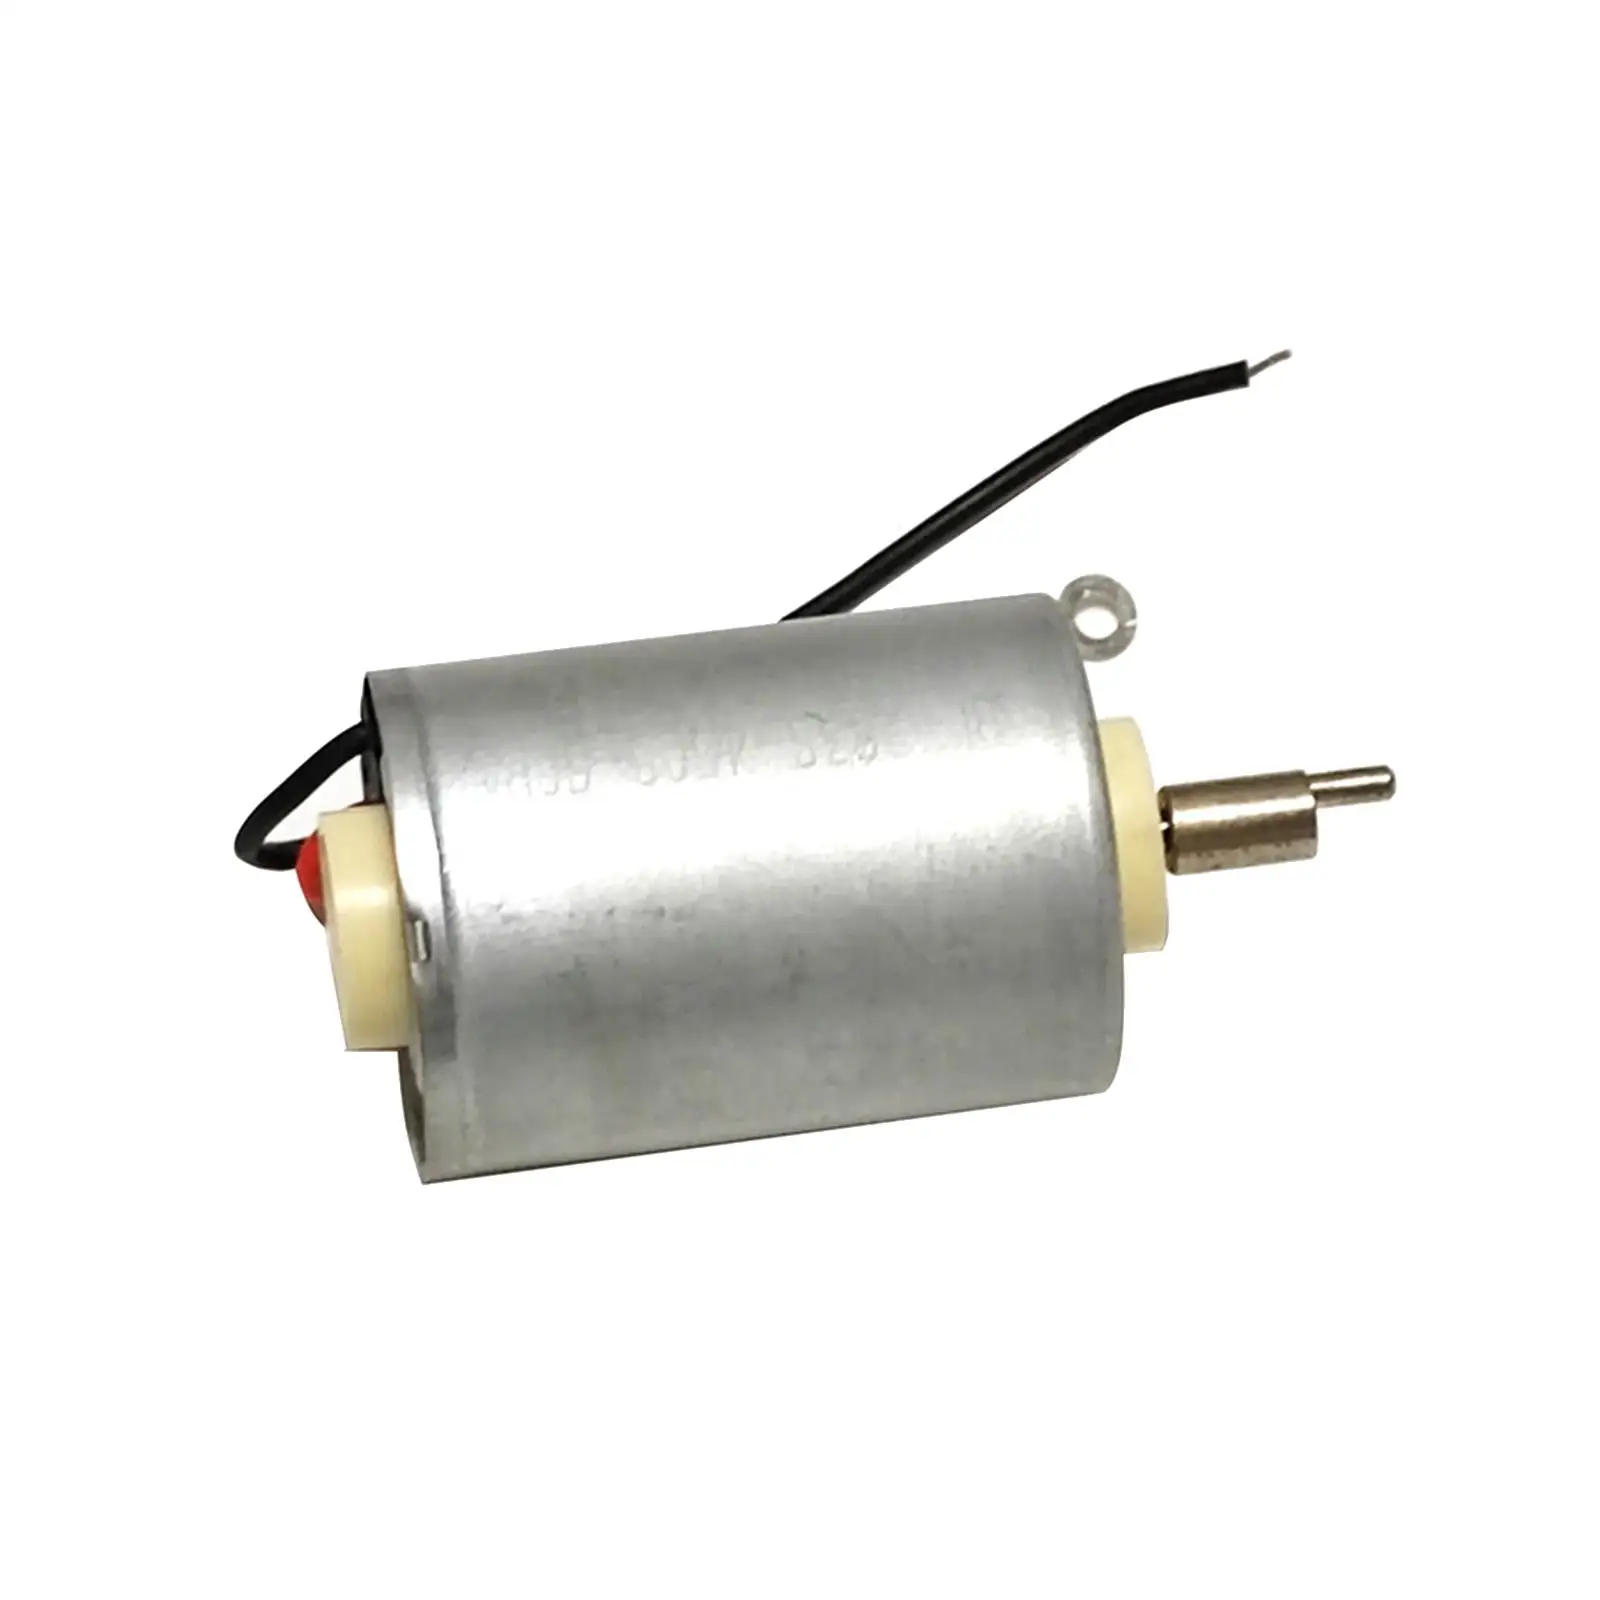 Motor for Hair Clippers Maintenance DIY High Performance Parts Upgrade Brushless Motor Rotary Motor for 8591 2245 2241 8148 2240